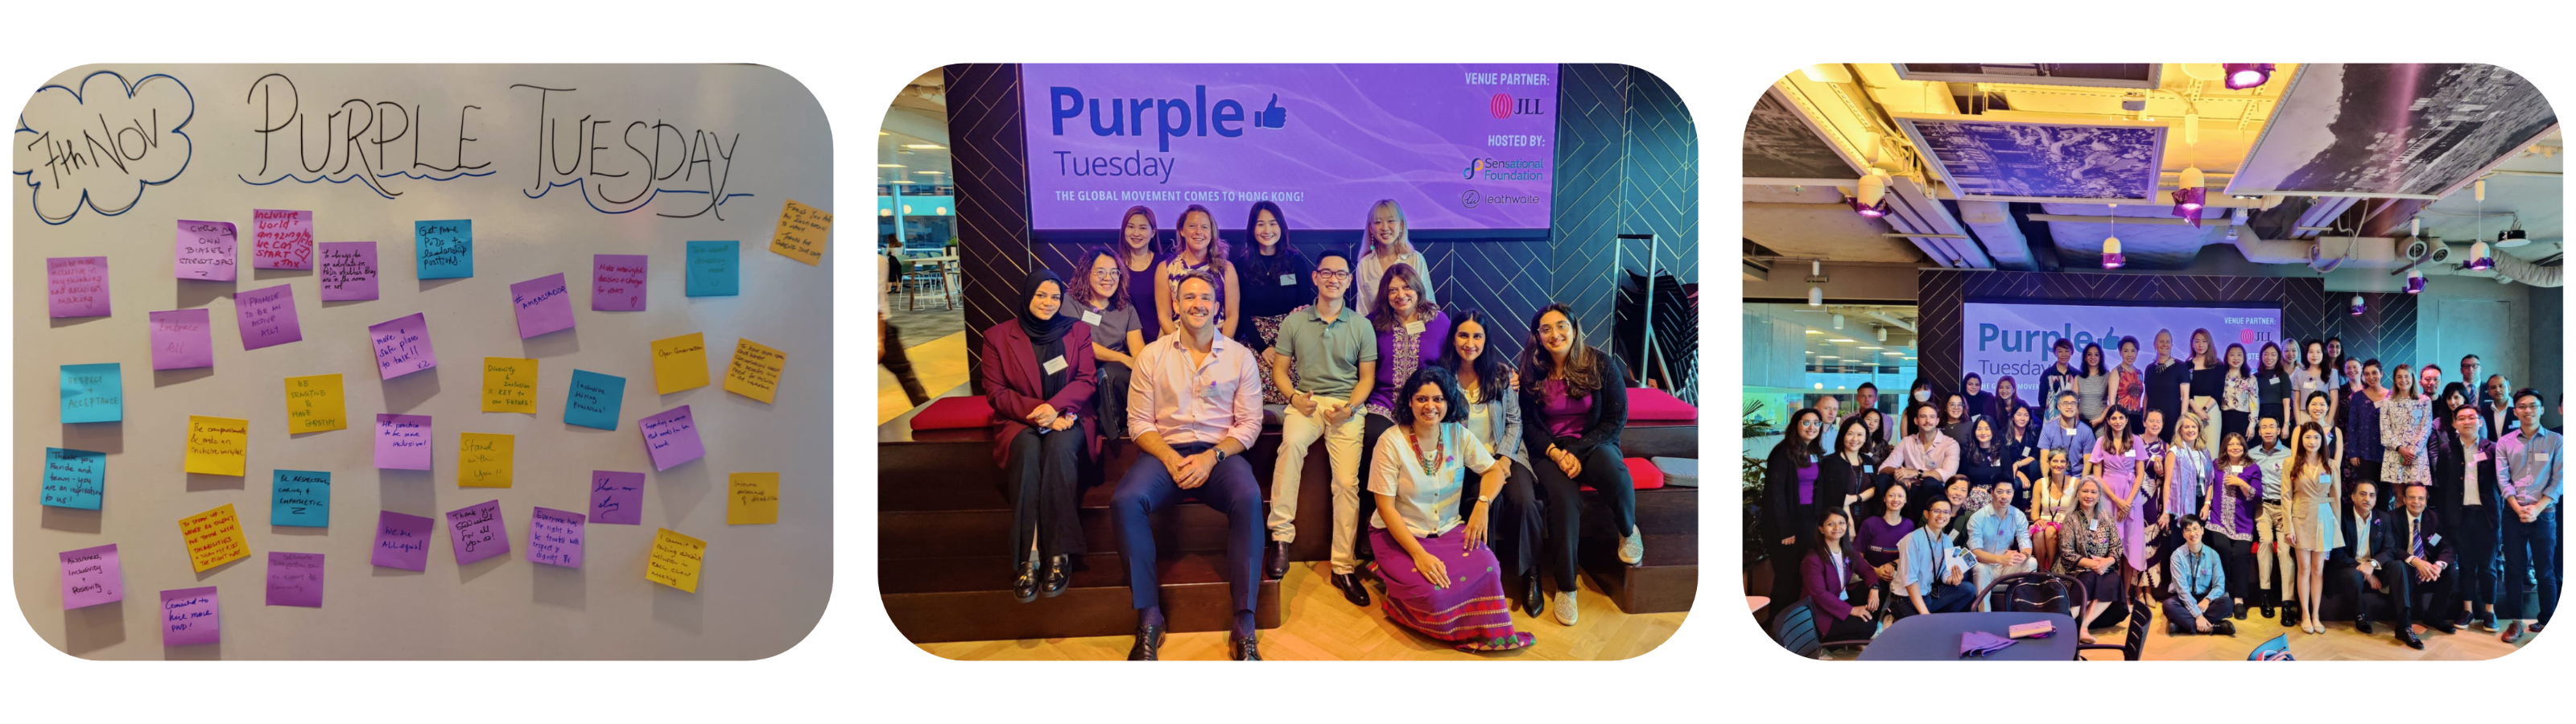 The Leathwaite offices adorned in a regal purple hue, creating a festive atmosphere as sponsor organizations come together, striking a pose for the photo. The image reflects a collaborative spirit and commitment to Purple Tuesday, embodying a supportive environment for disability inclusivity.